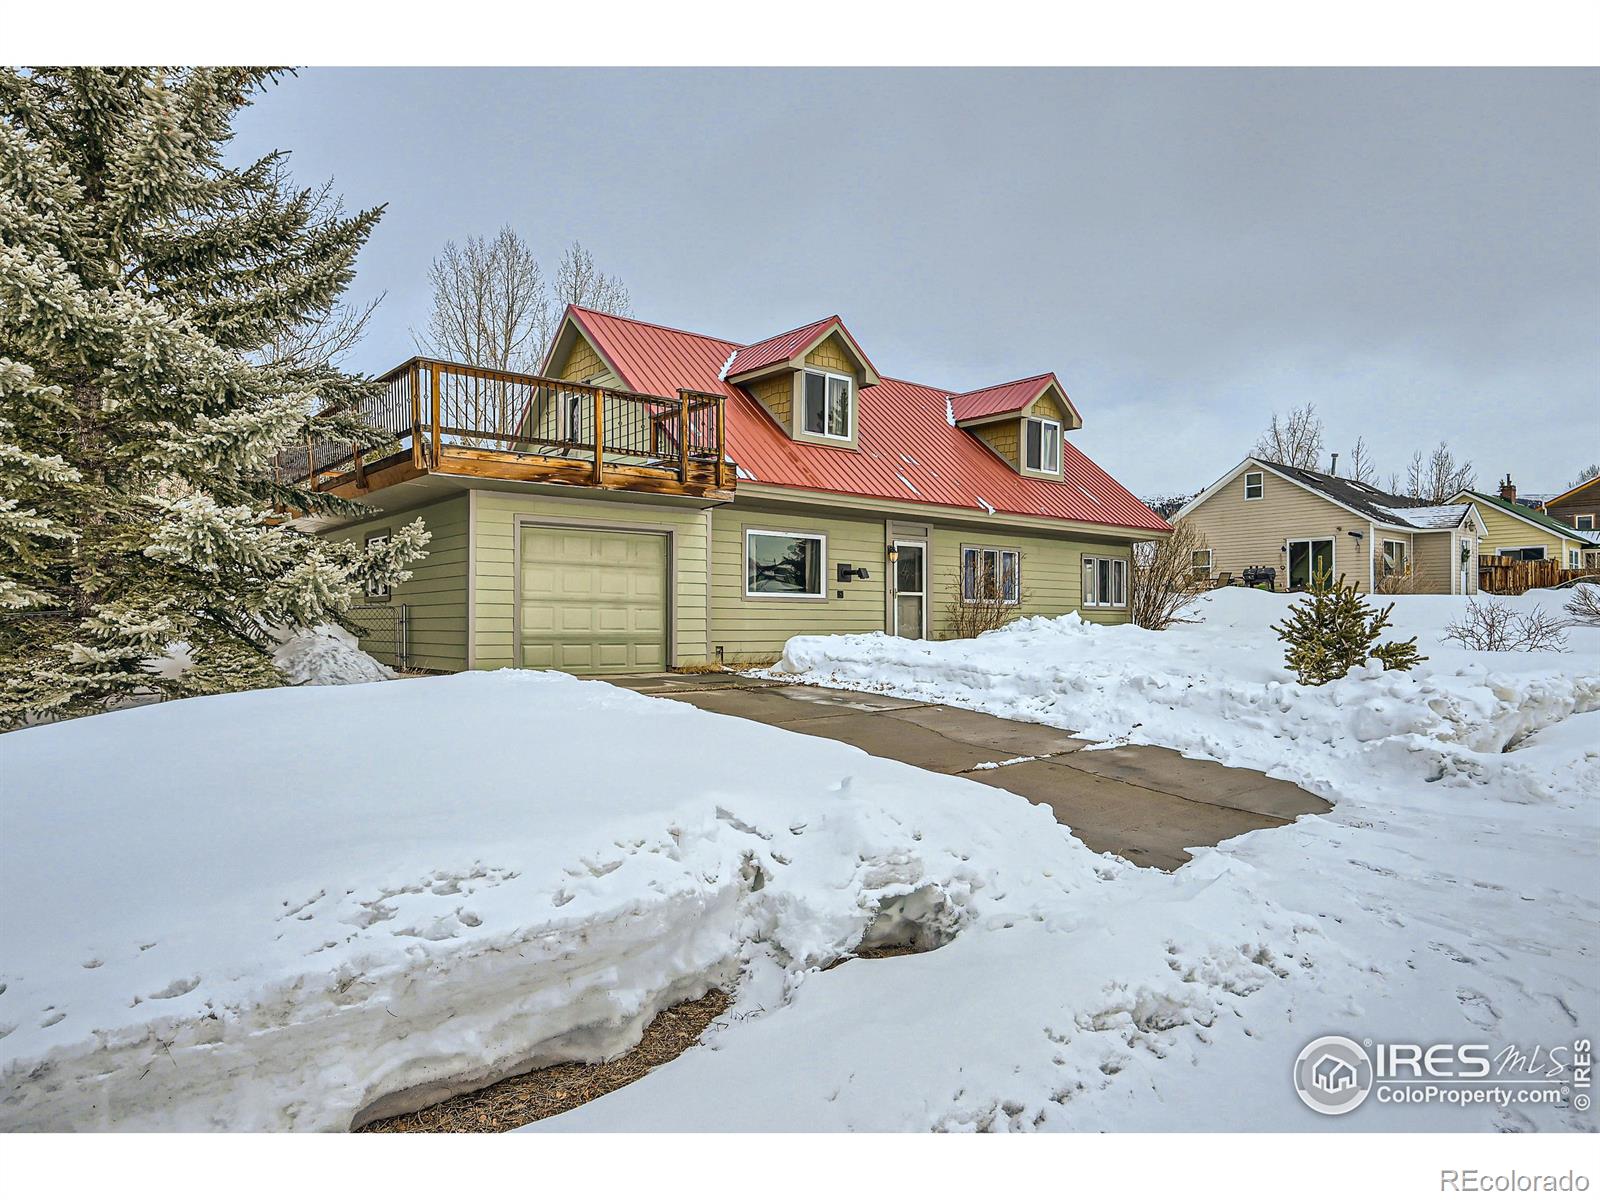 Report Image for 125 W 17th Street,Leadville, Colorado